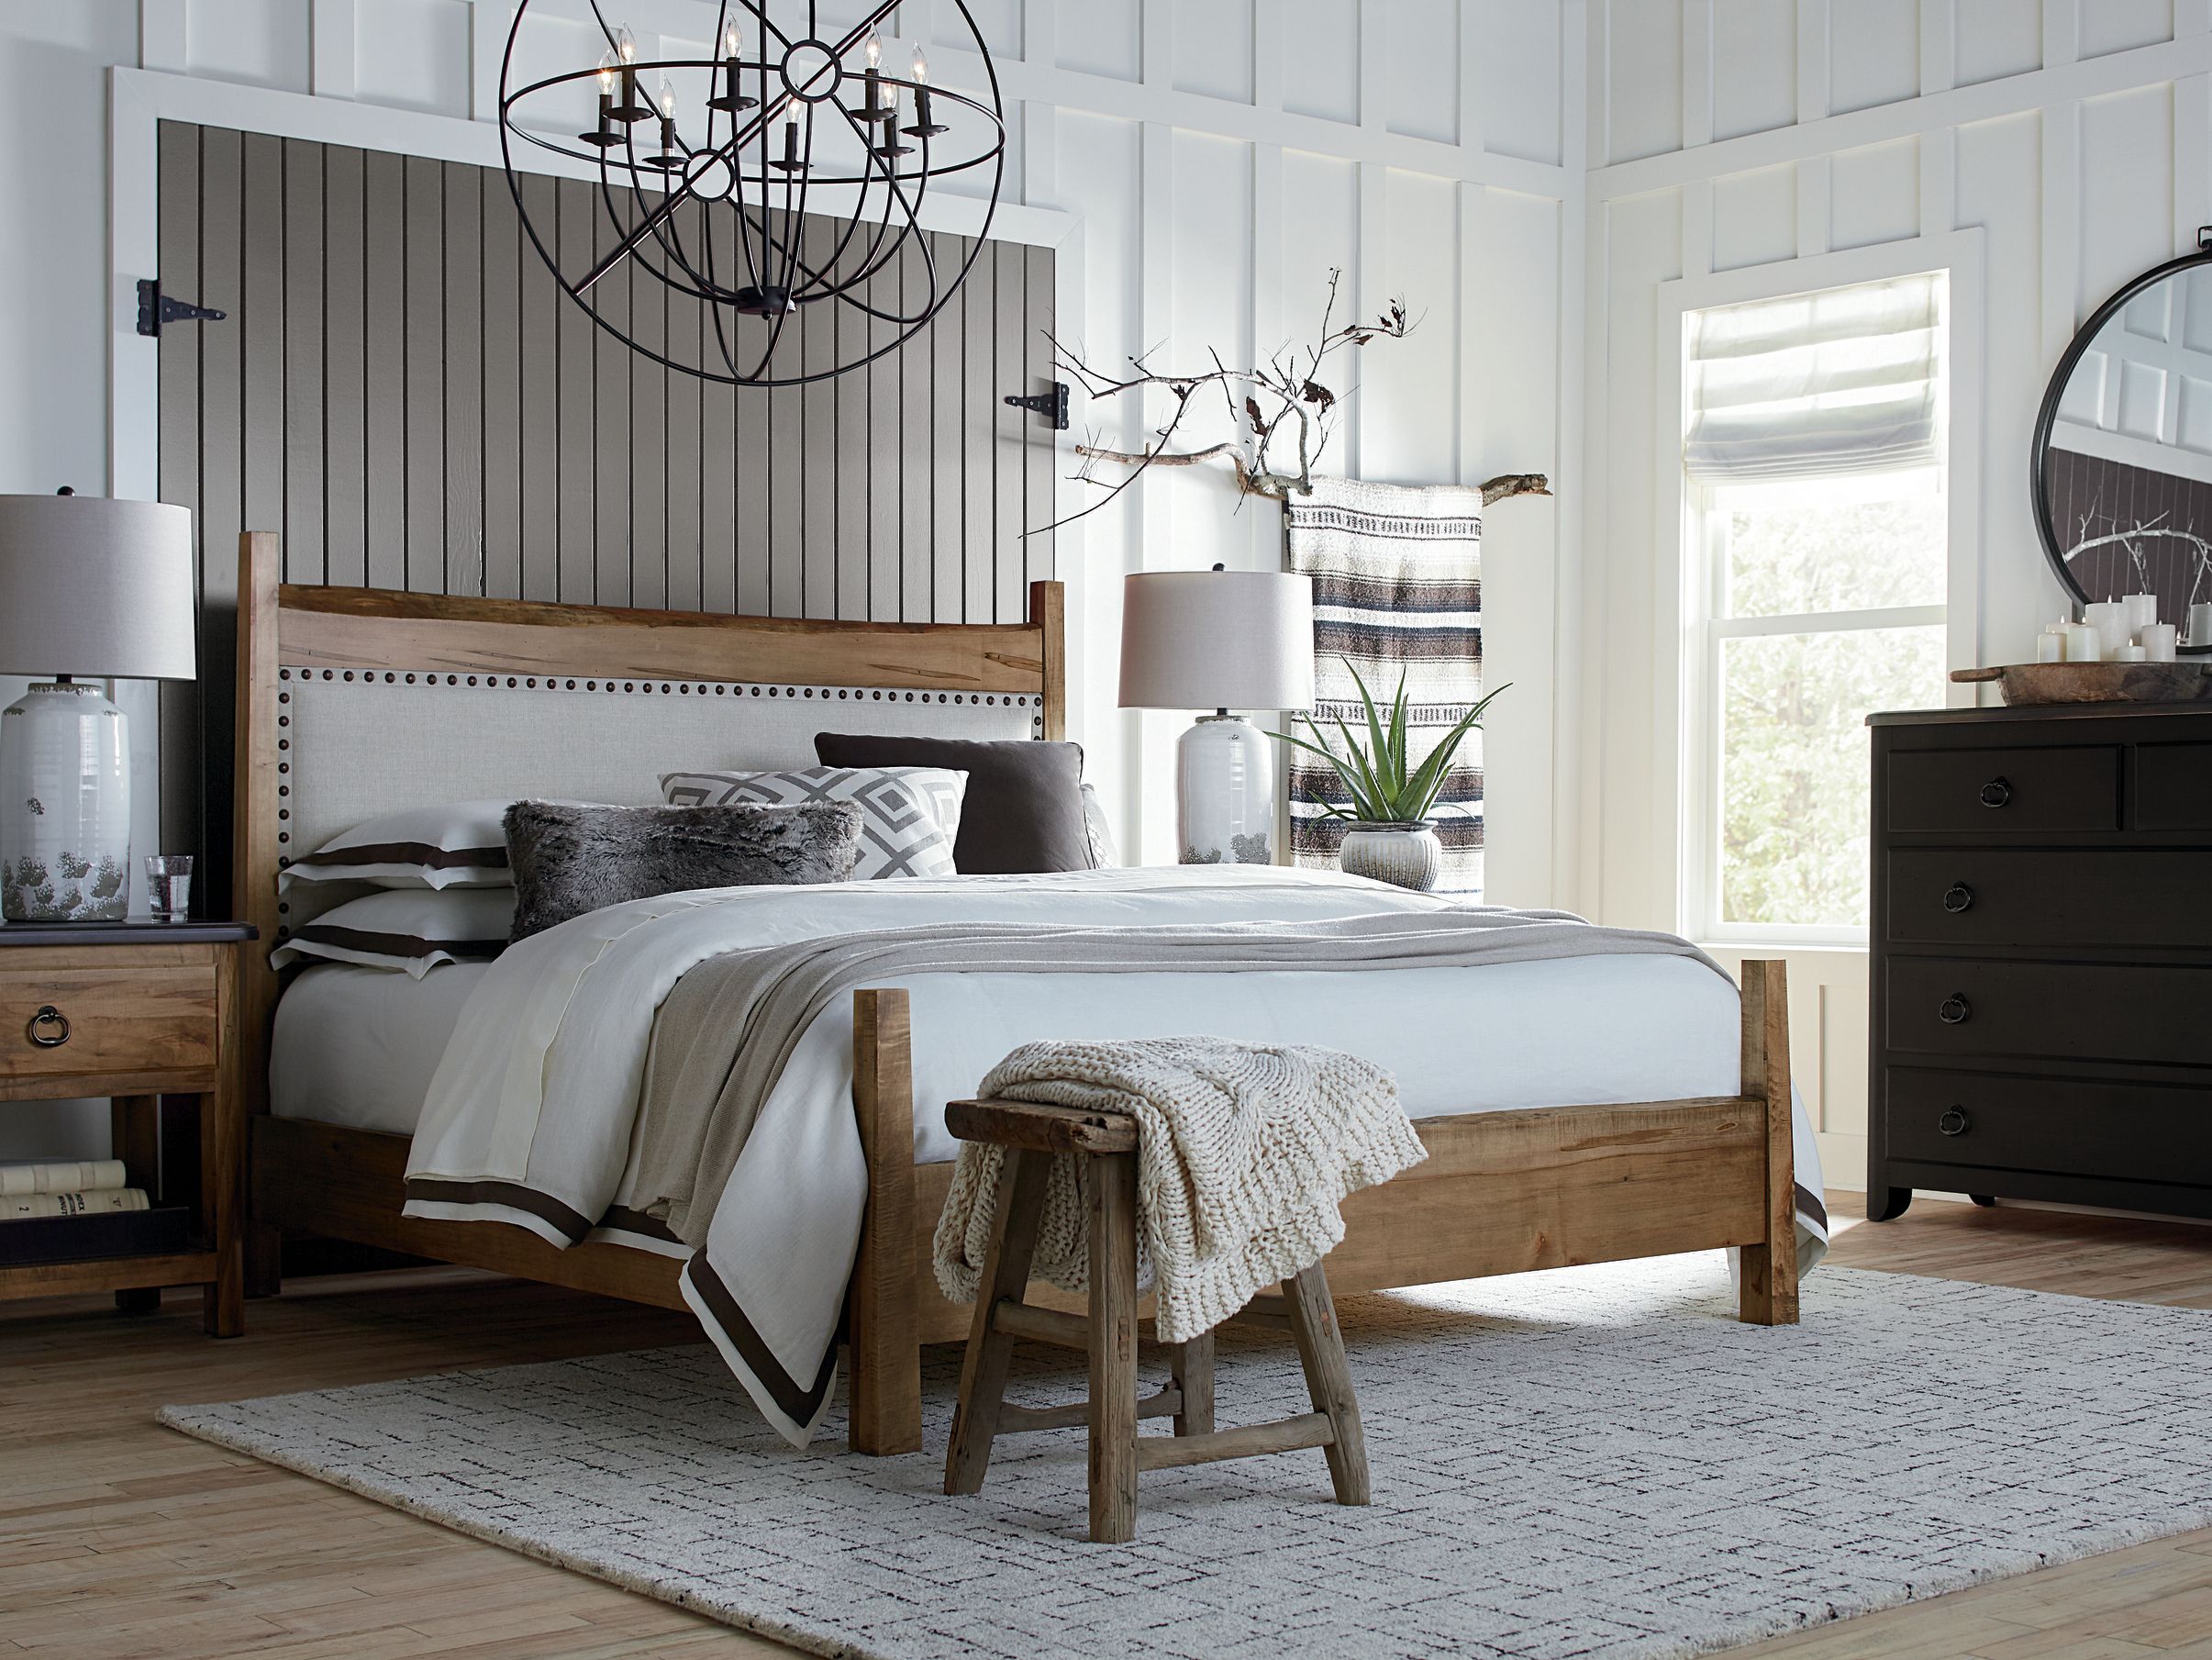 King-Size Bed Dimensions | Bassett Furniture